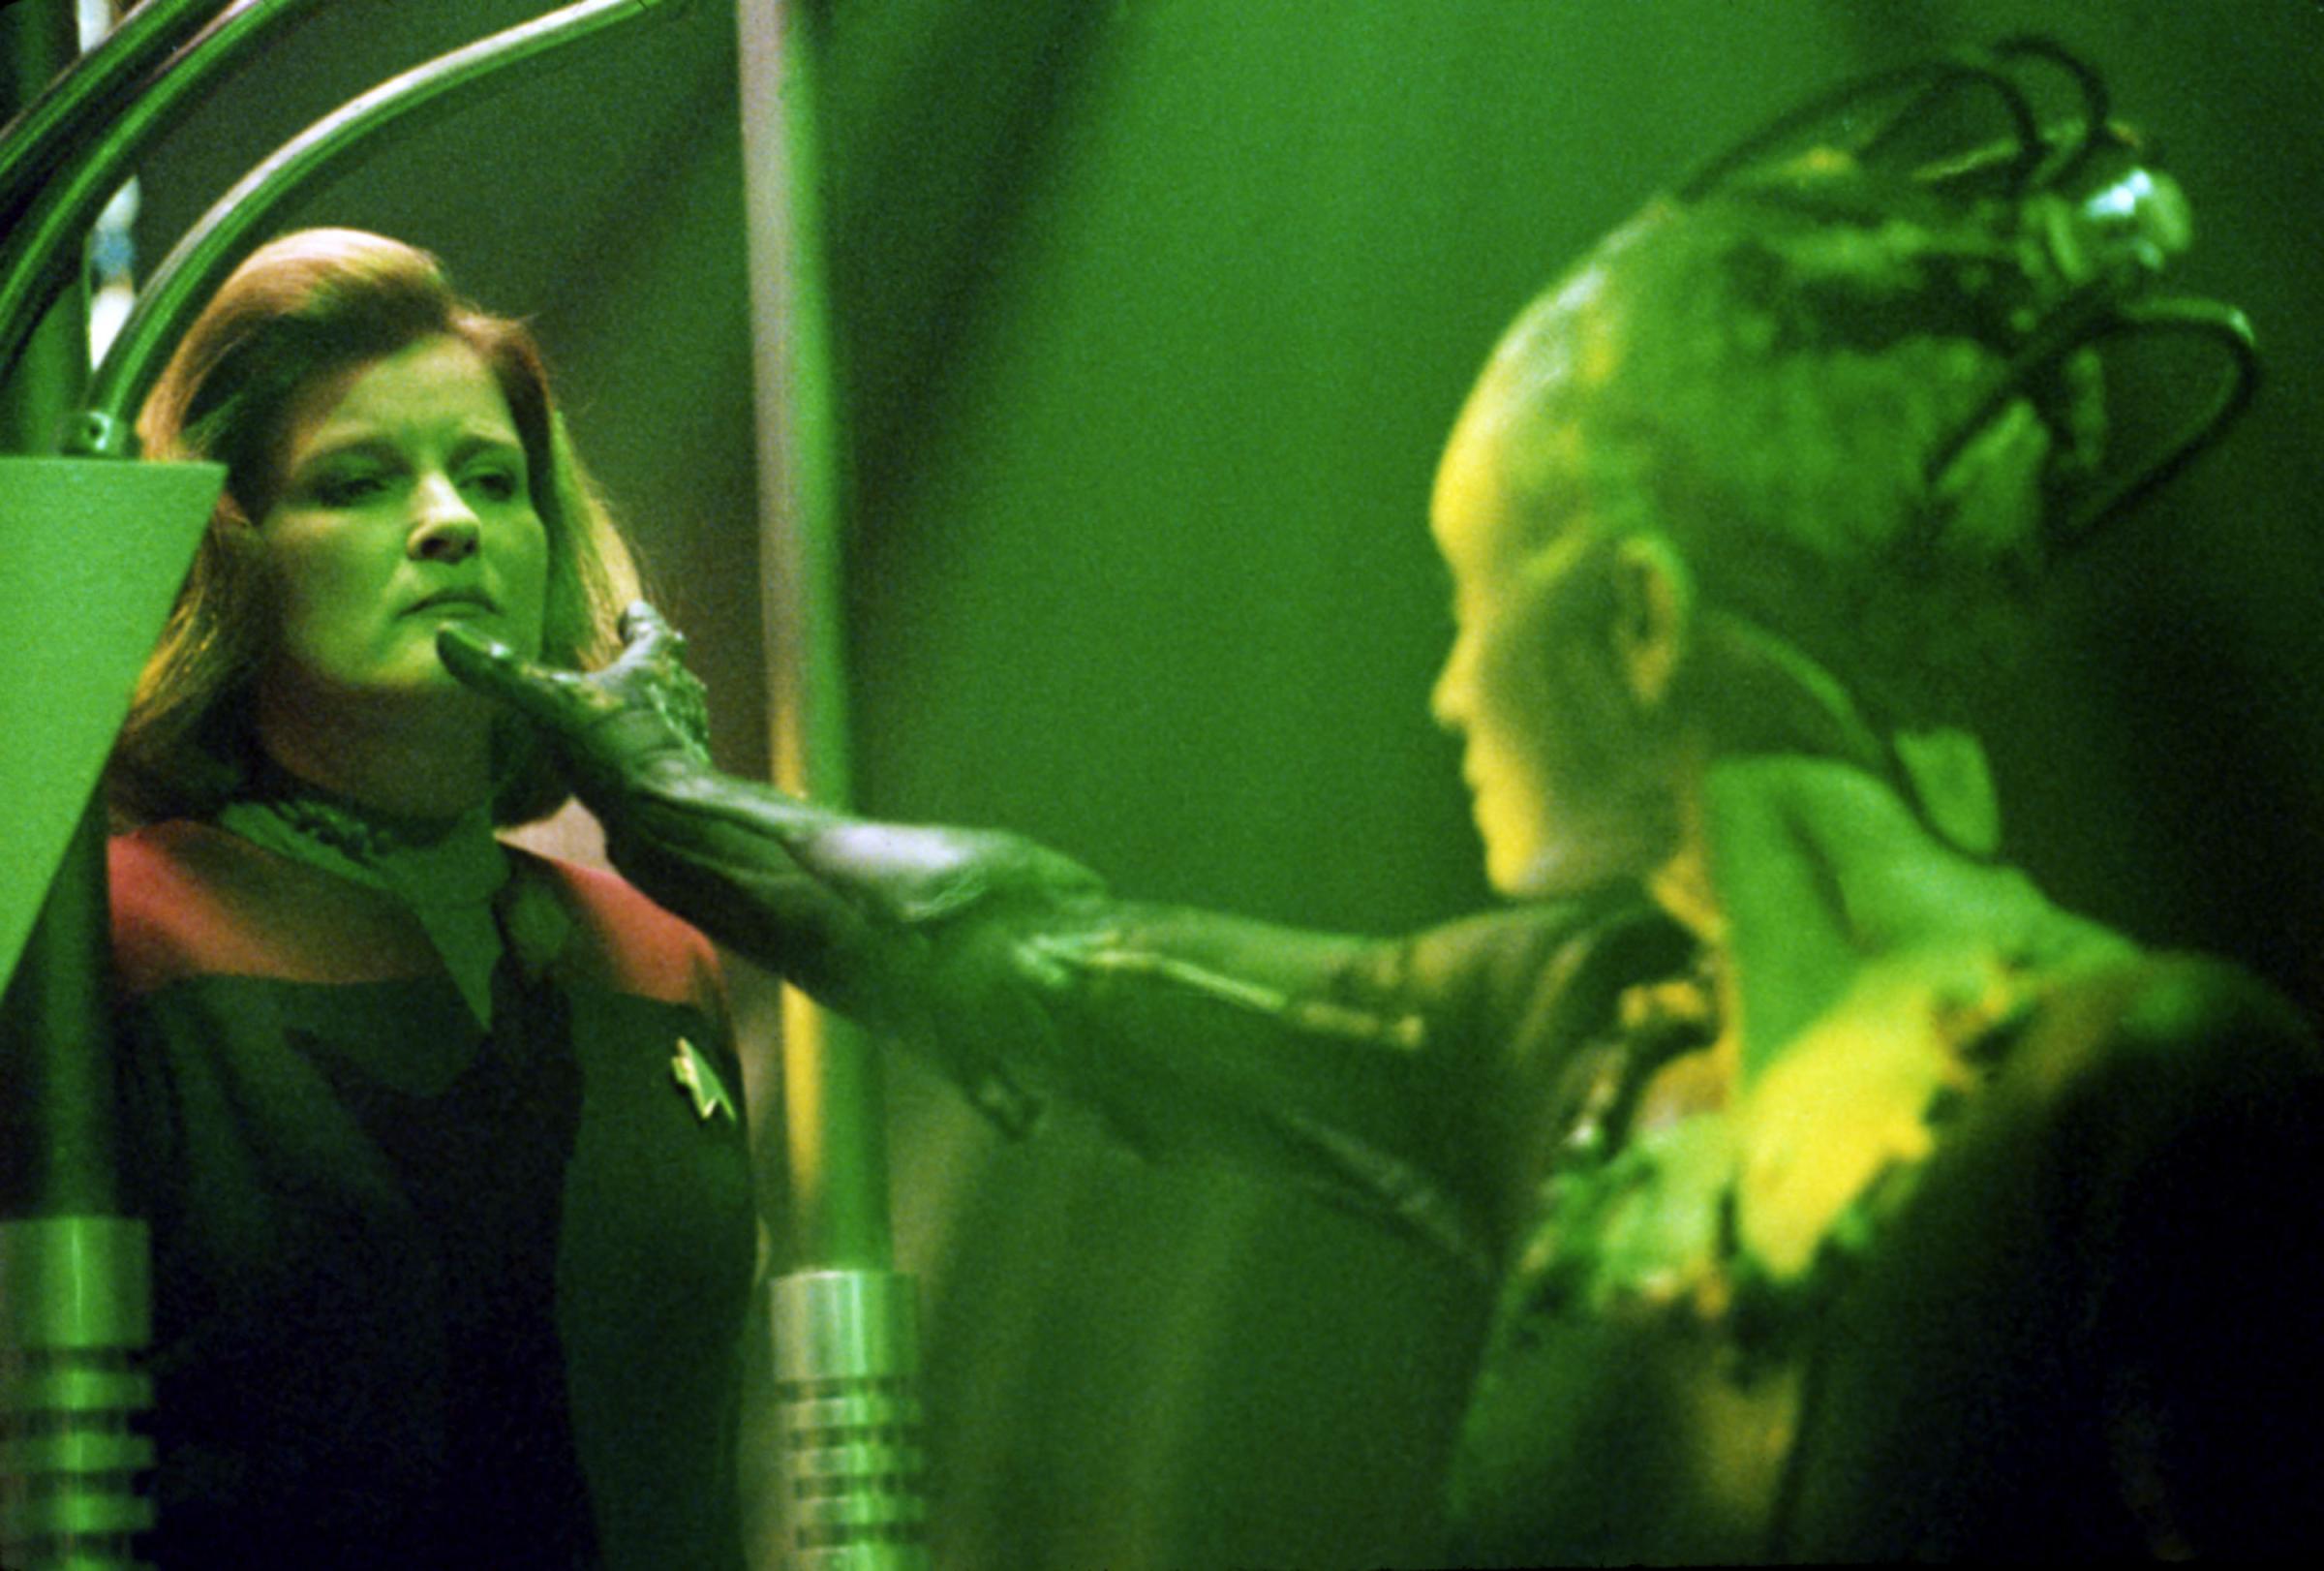 Actress Kate Mulgrew (Left) Stars As (Captain Kathryn Janeway) And Susanna Thompson Stars As (The Borg Queen) In United Paramount Network's Sci-Fi Television Series "Star Trek: Voyager."